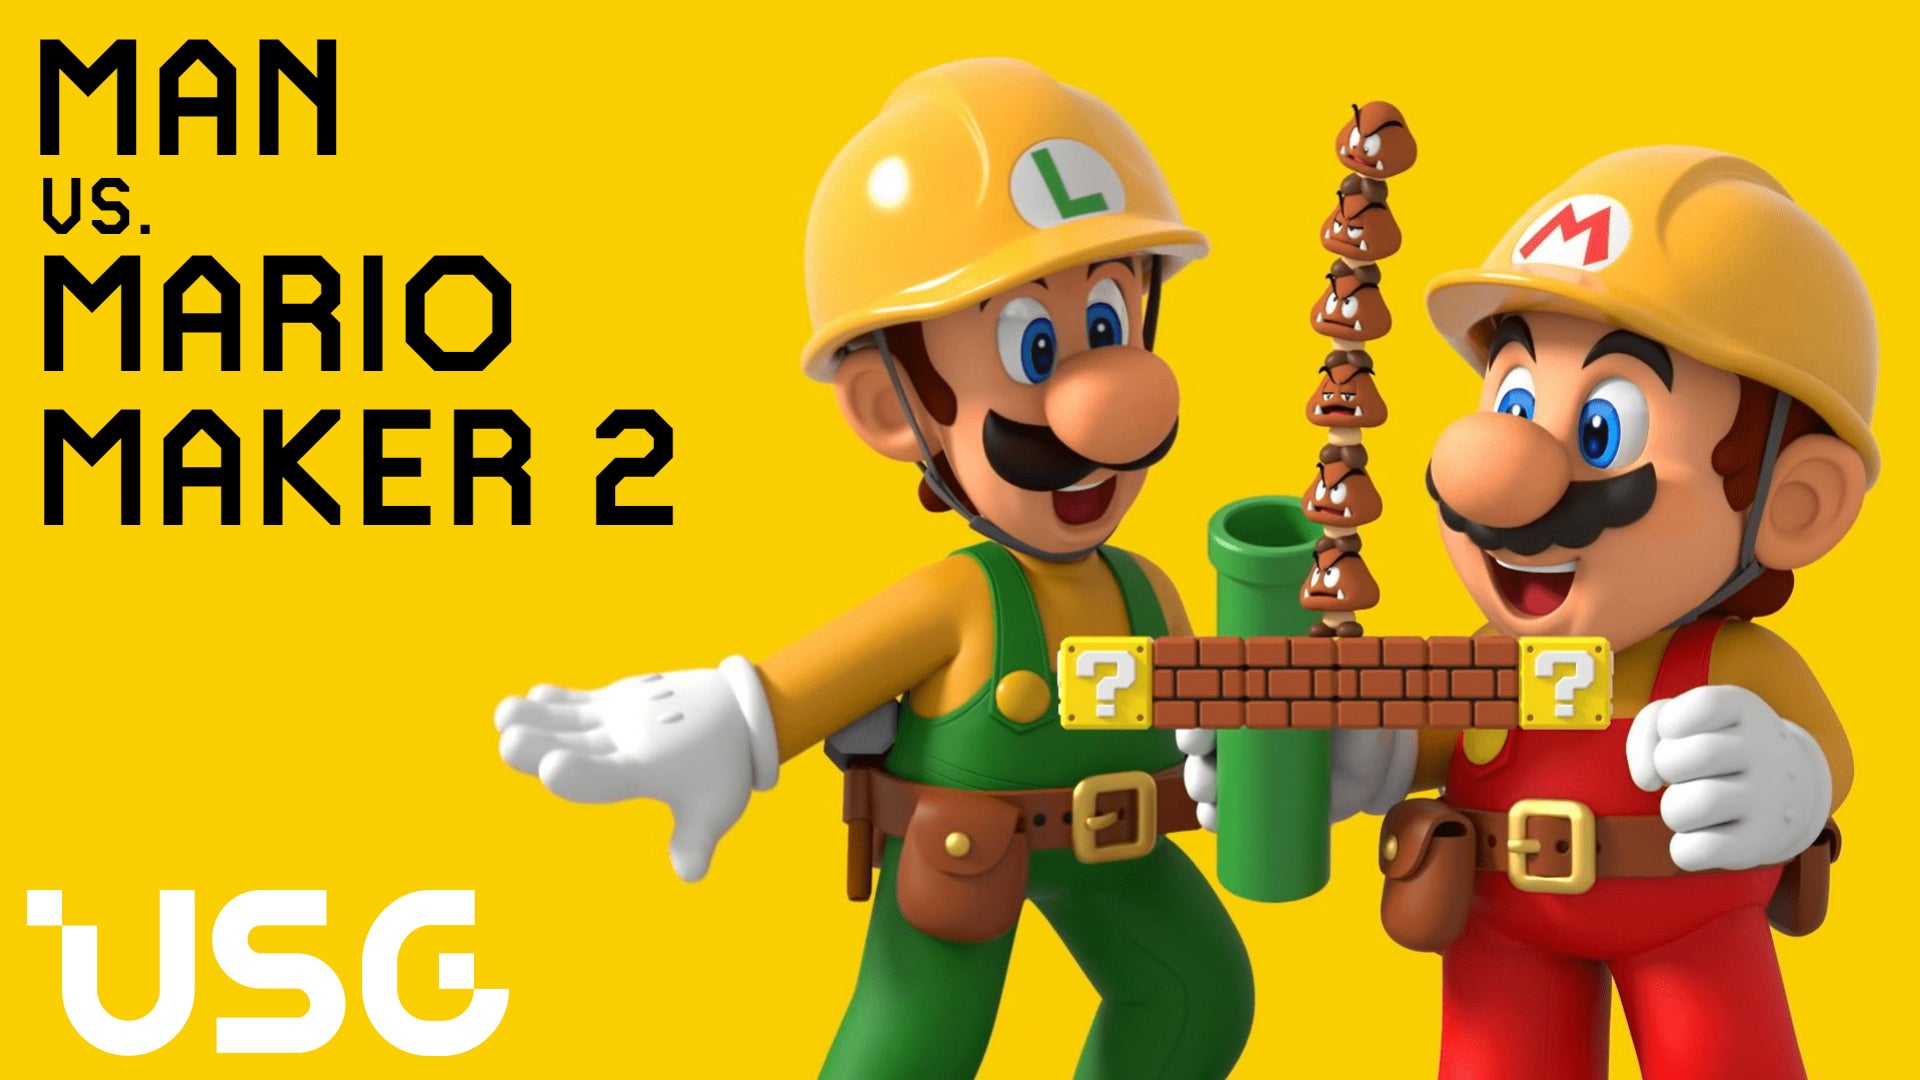 Image for Man vs. Mario Maker 2: The Superball, Arby's, and World 1-1 is Burning